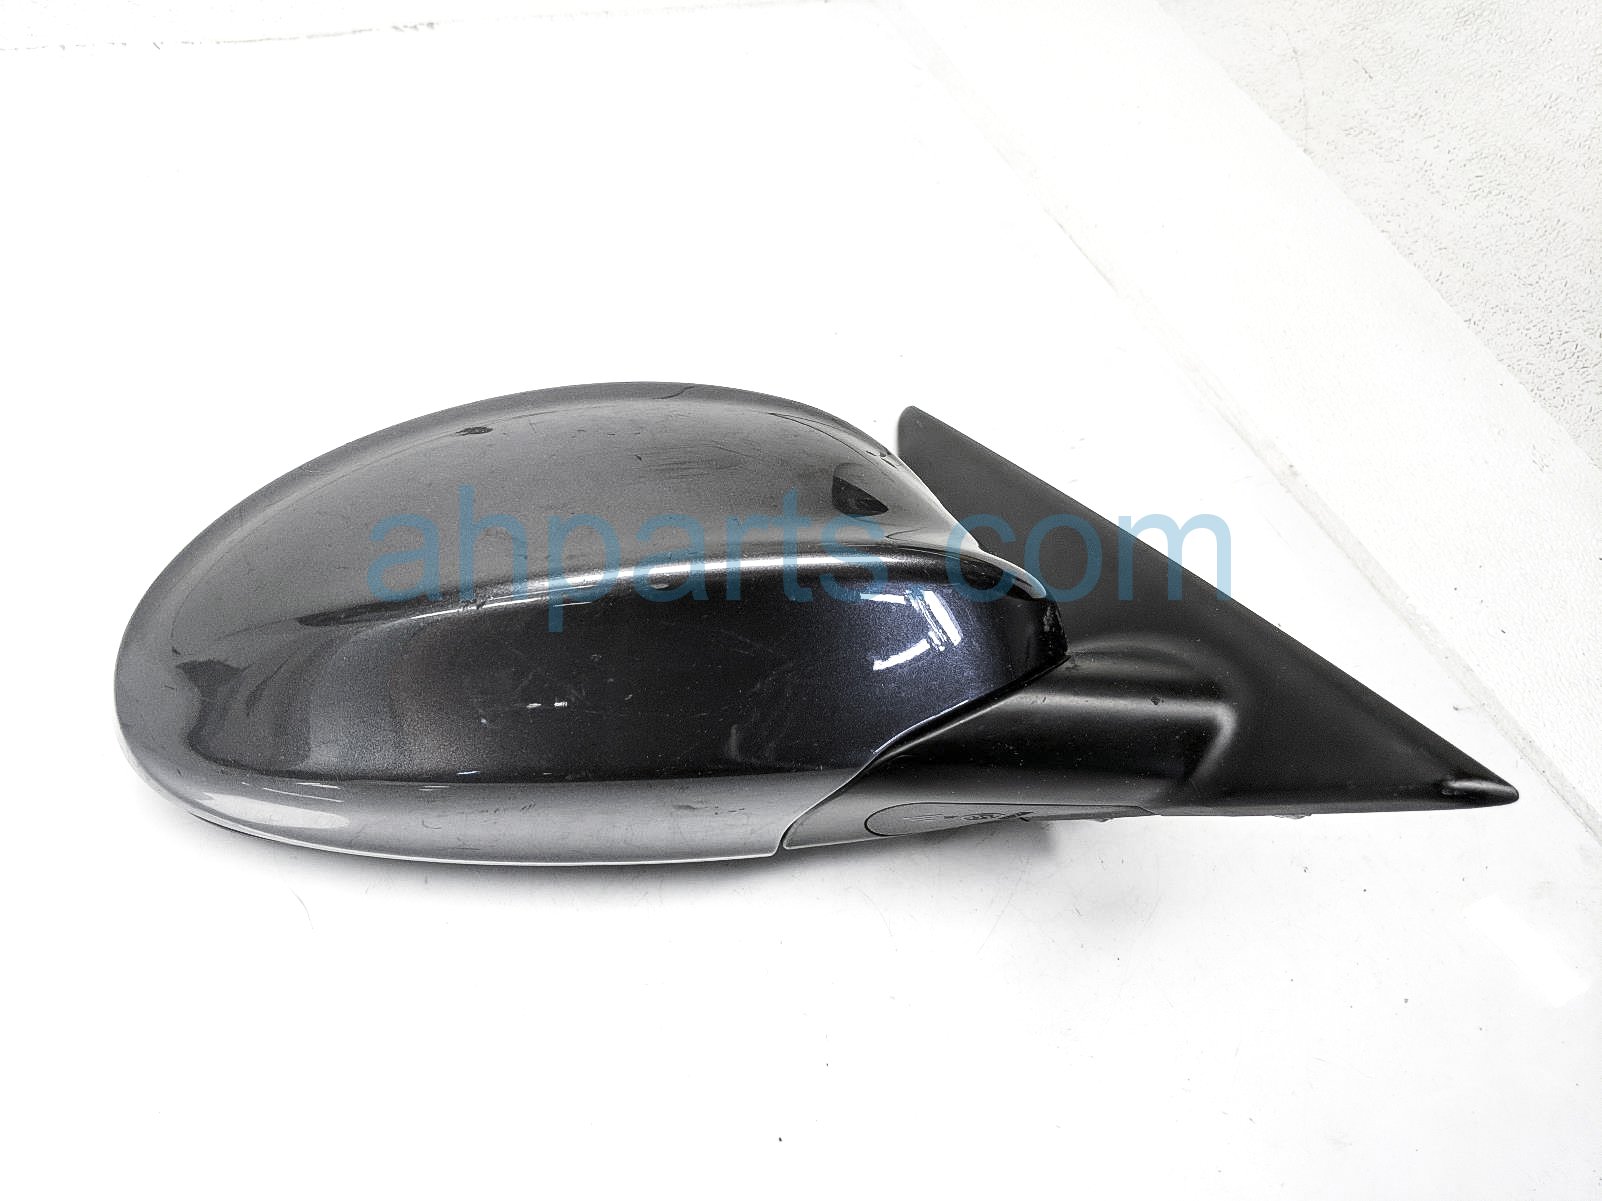 $75 BMW RH SIDE VIEW MIRROR - GRAY - NOTES